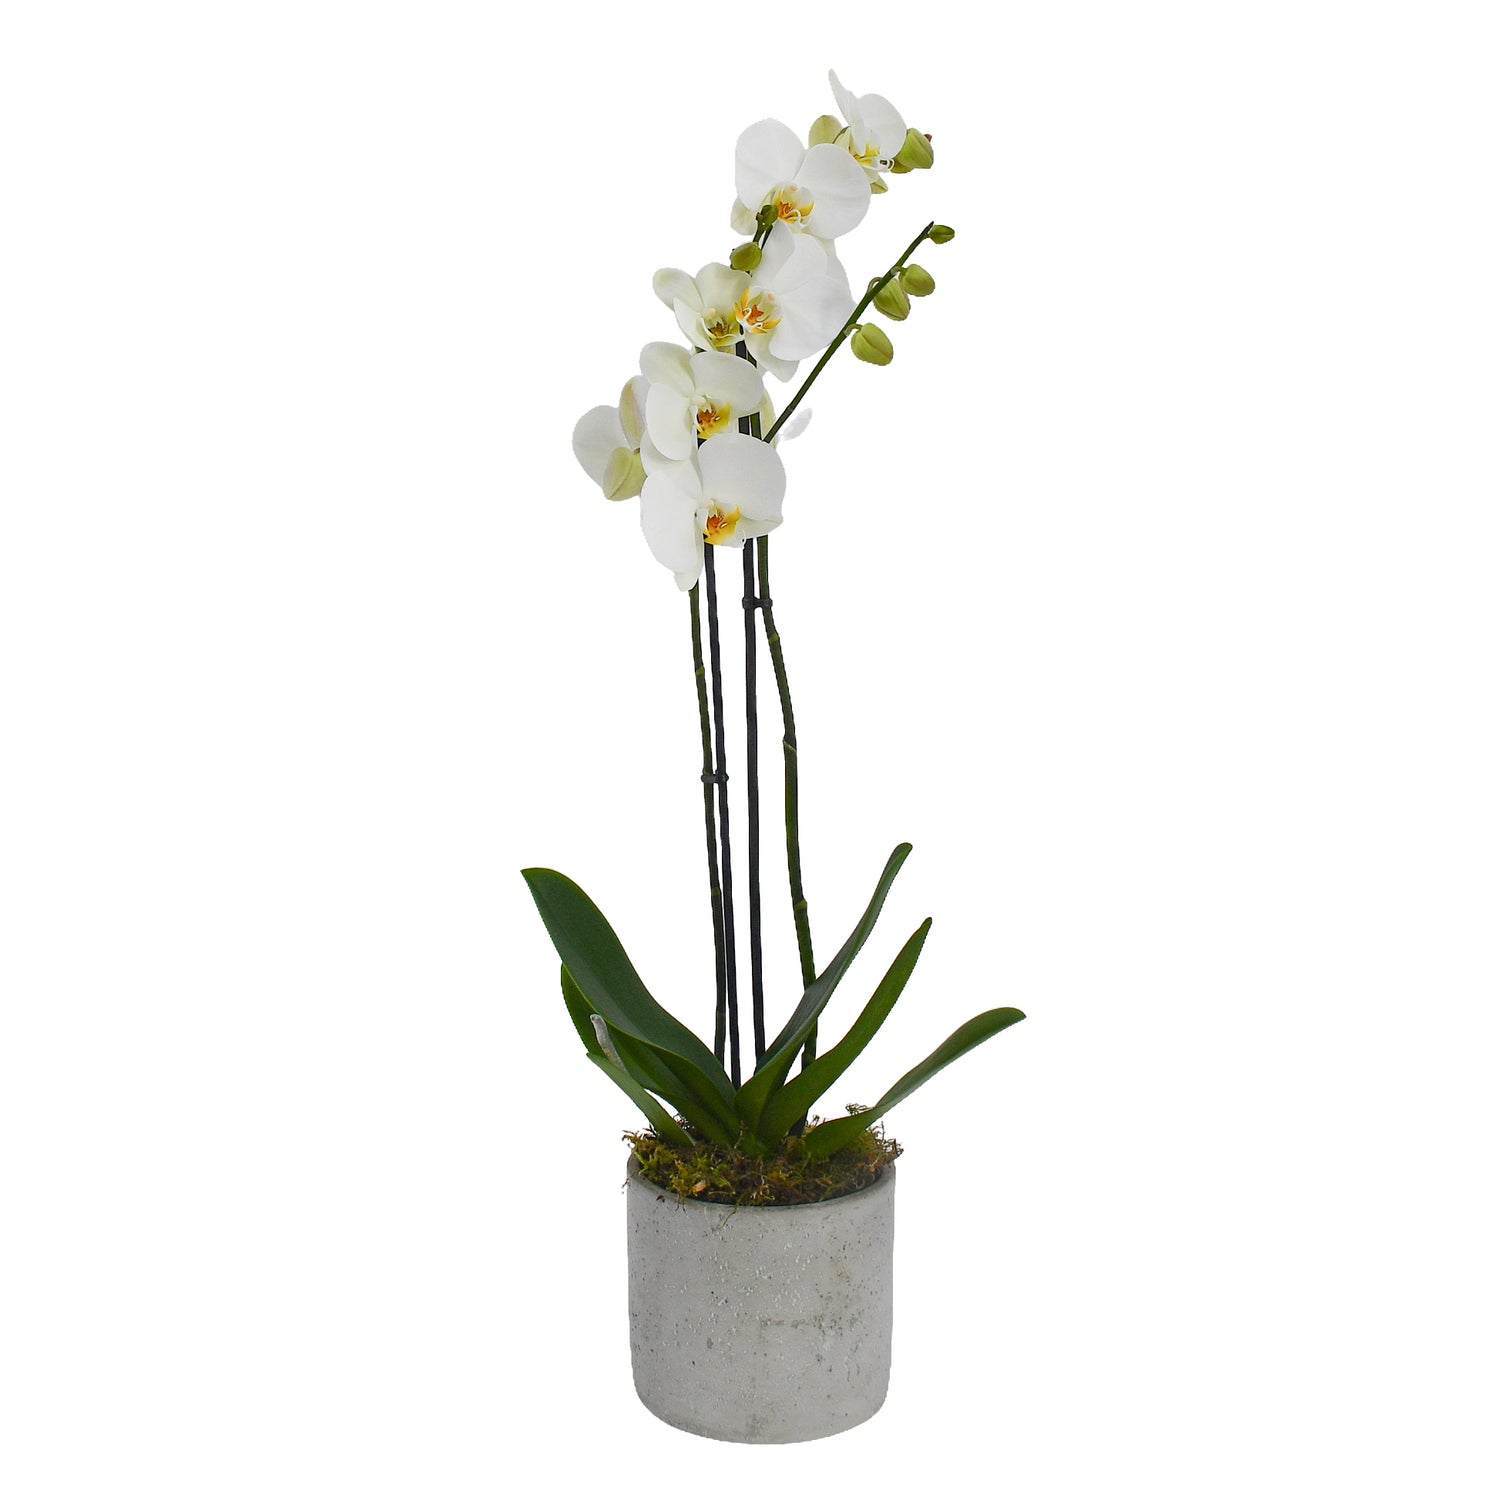 Large White Orchids